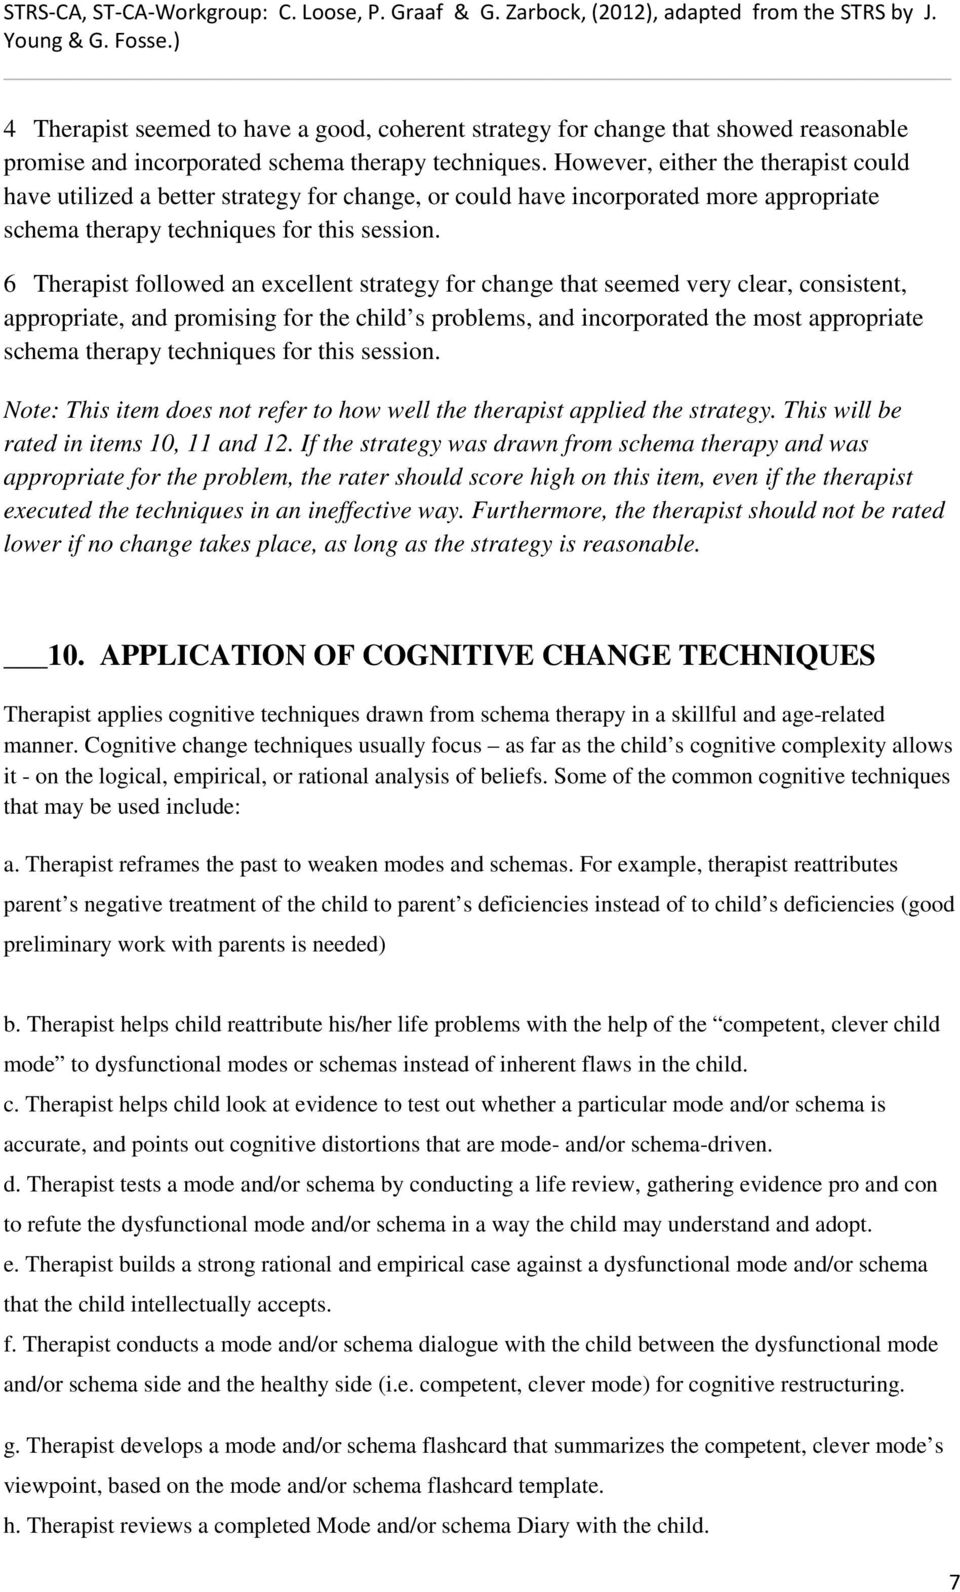 6 Therapist followed an excellent strategy for change that seemed very clear, consistent, appropriate, and promising for the child s problems, and incorporated the most appropriate schema therapy